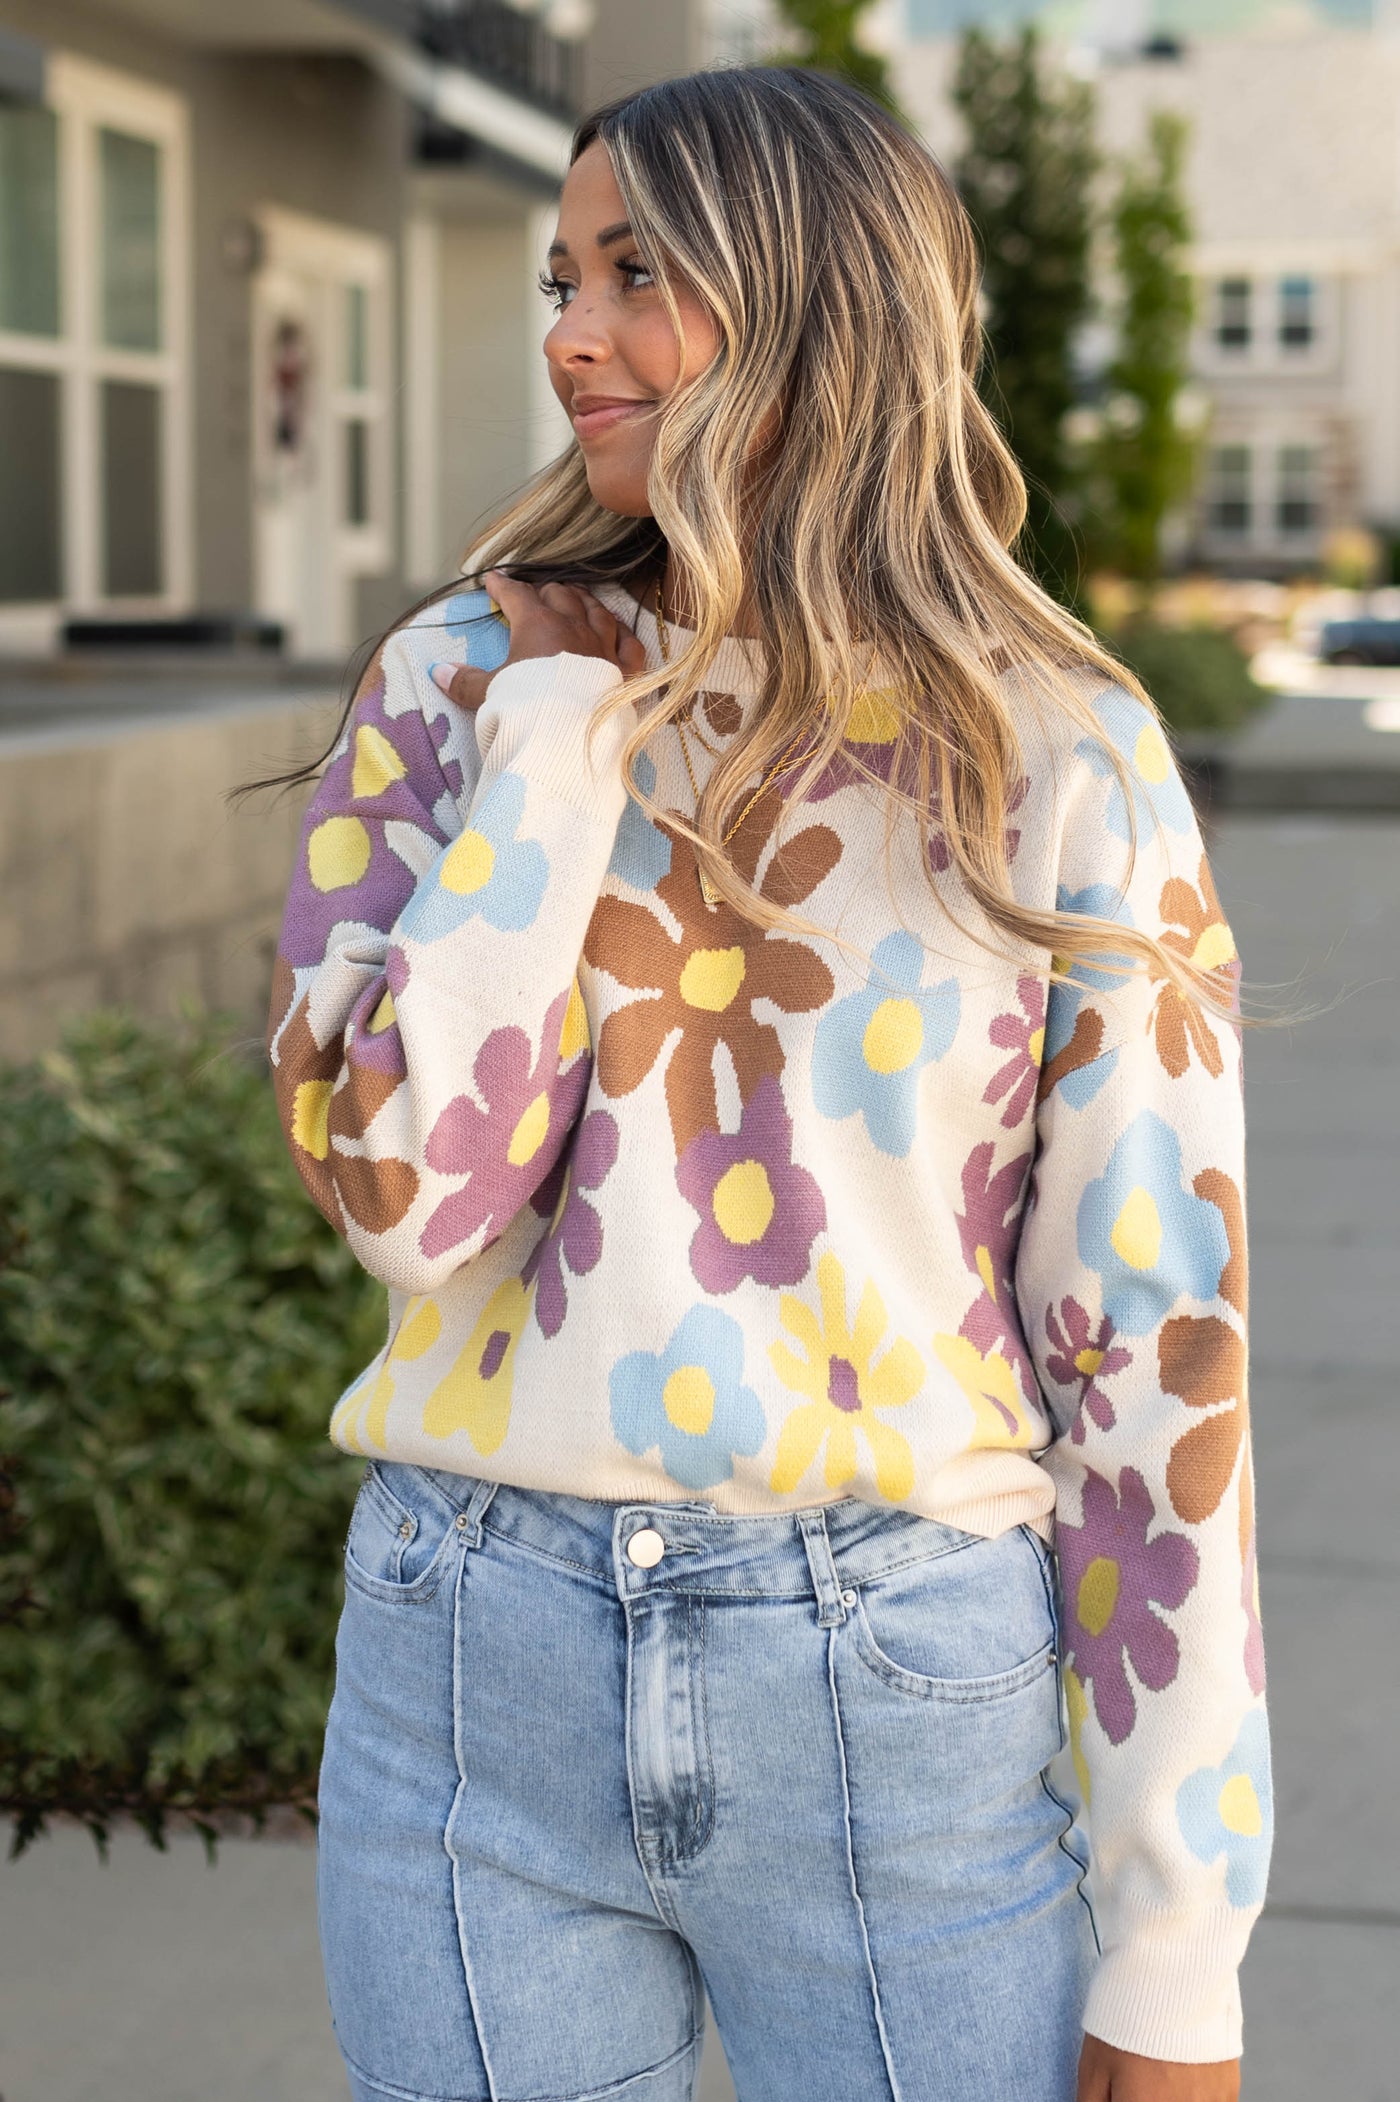 Long sleeve cream sweater with floral print